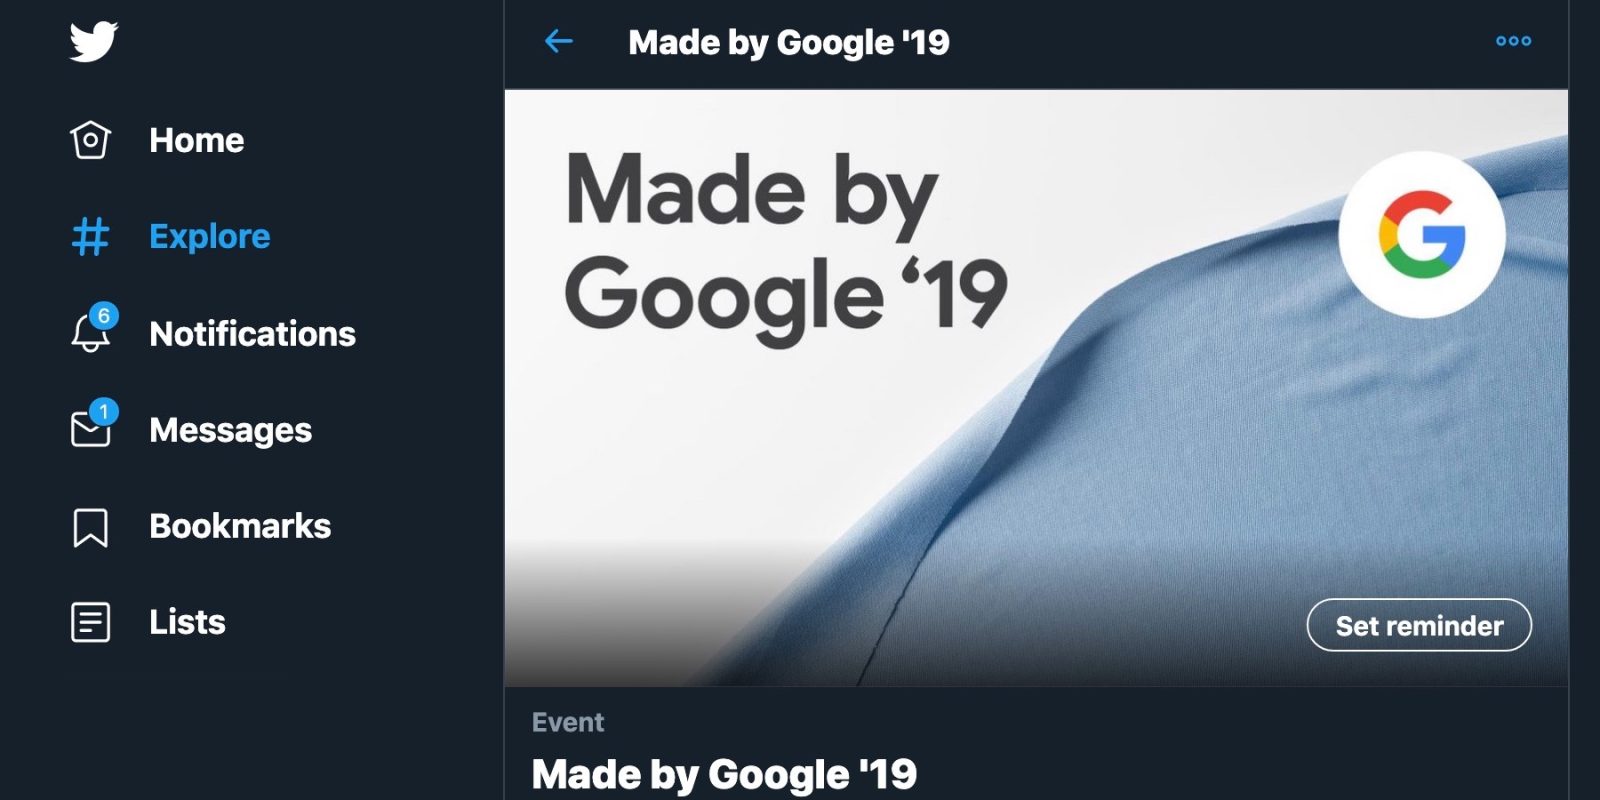 Made by Google Twitter stream